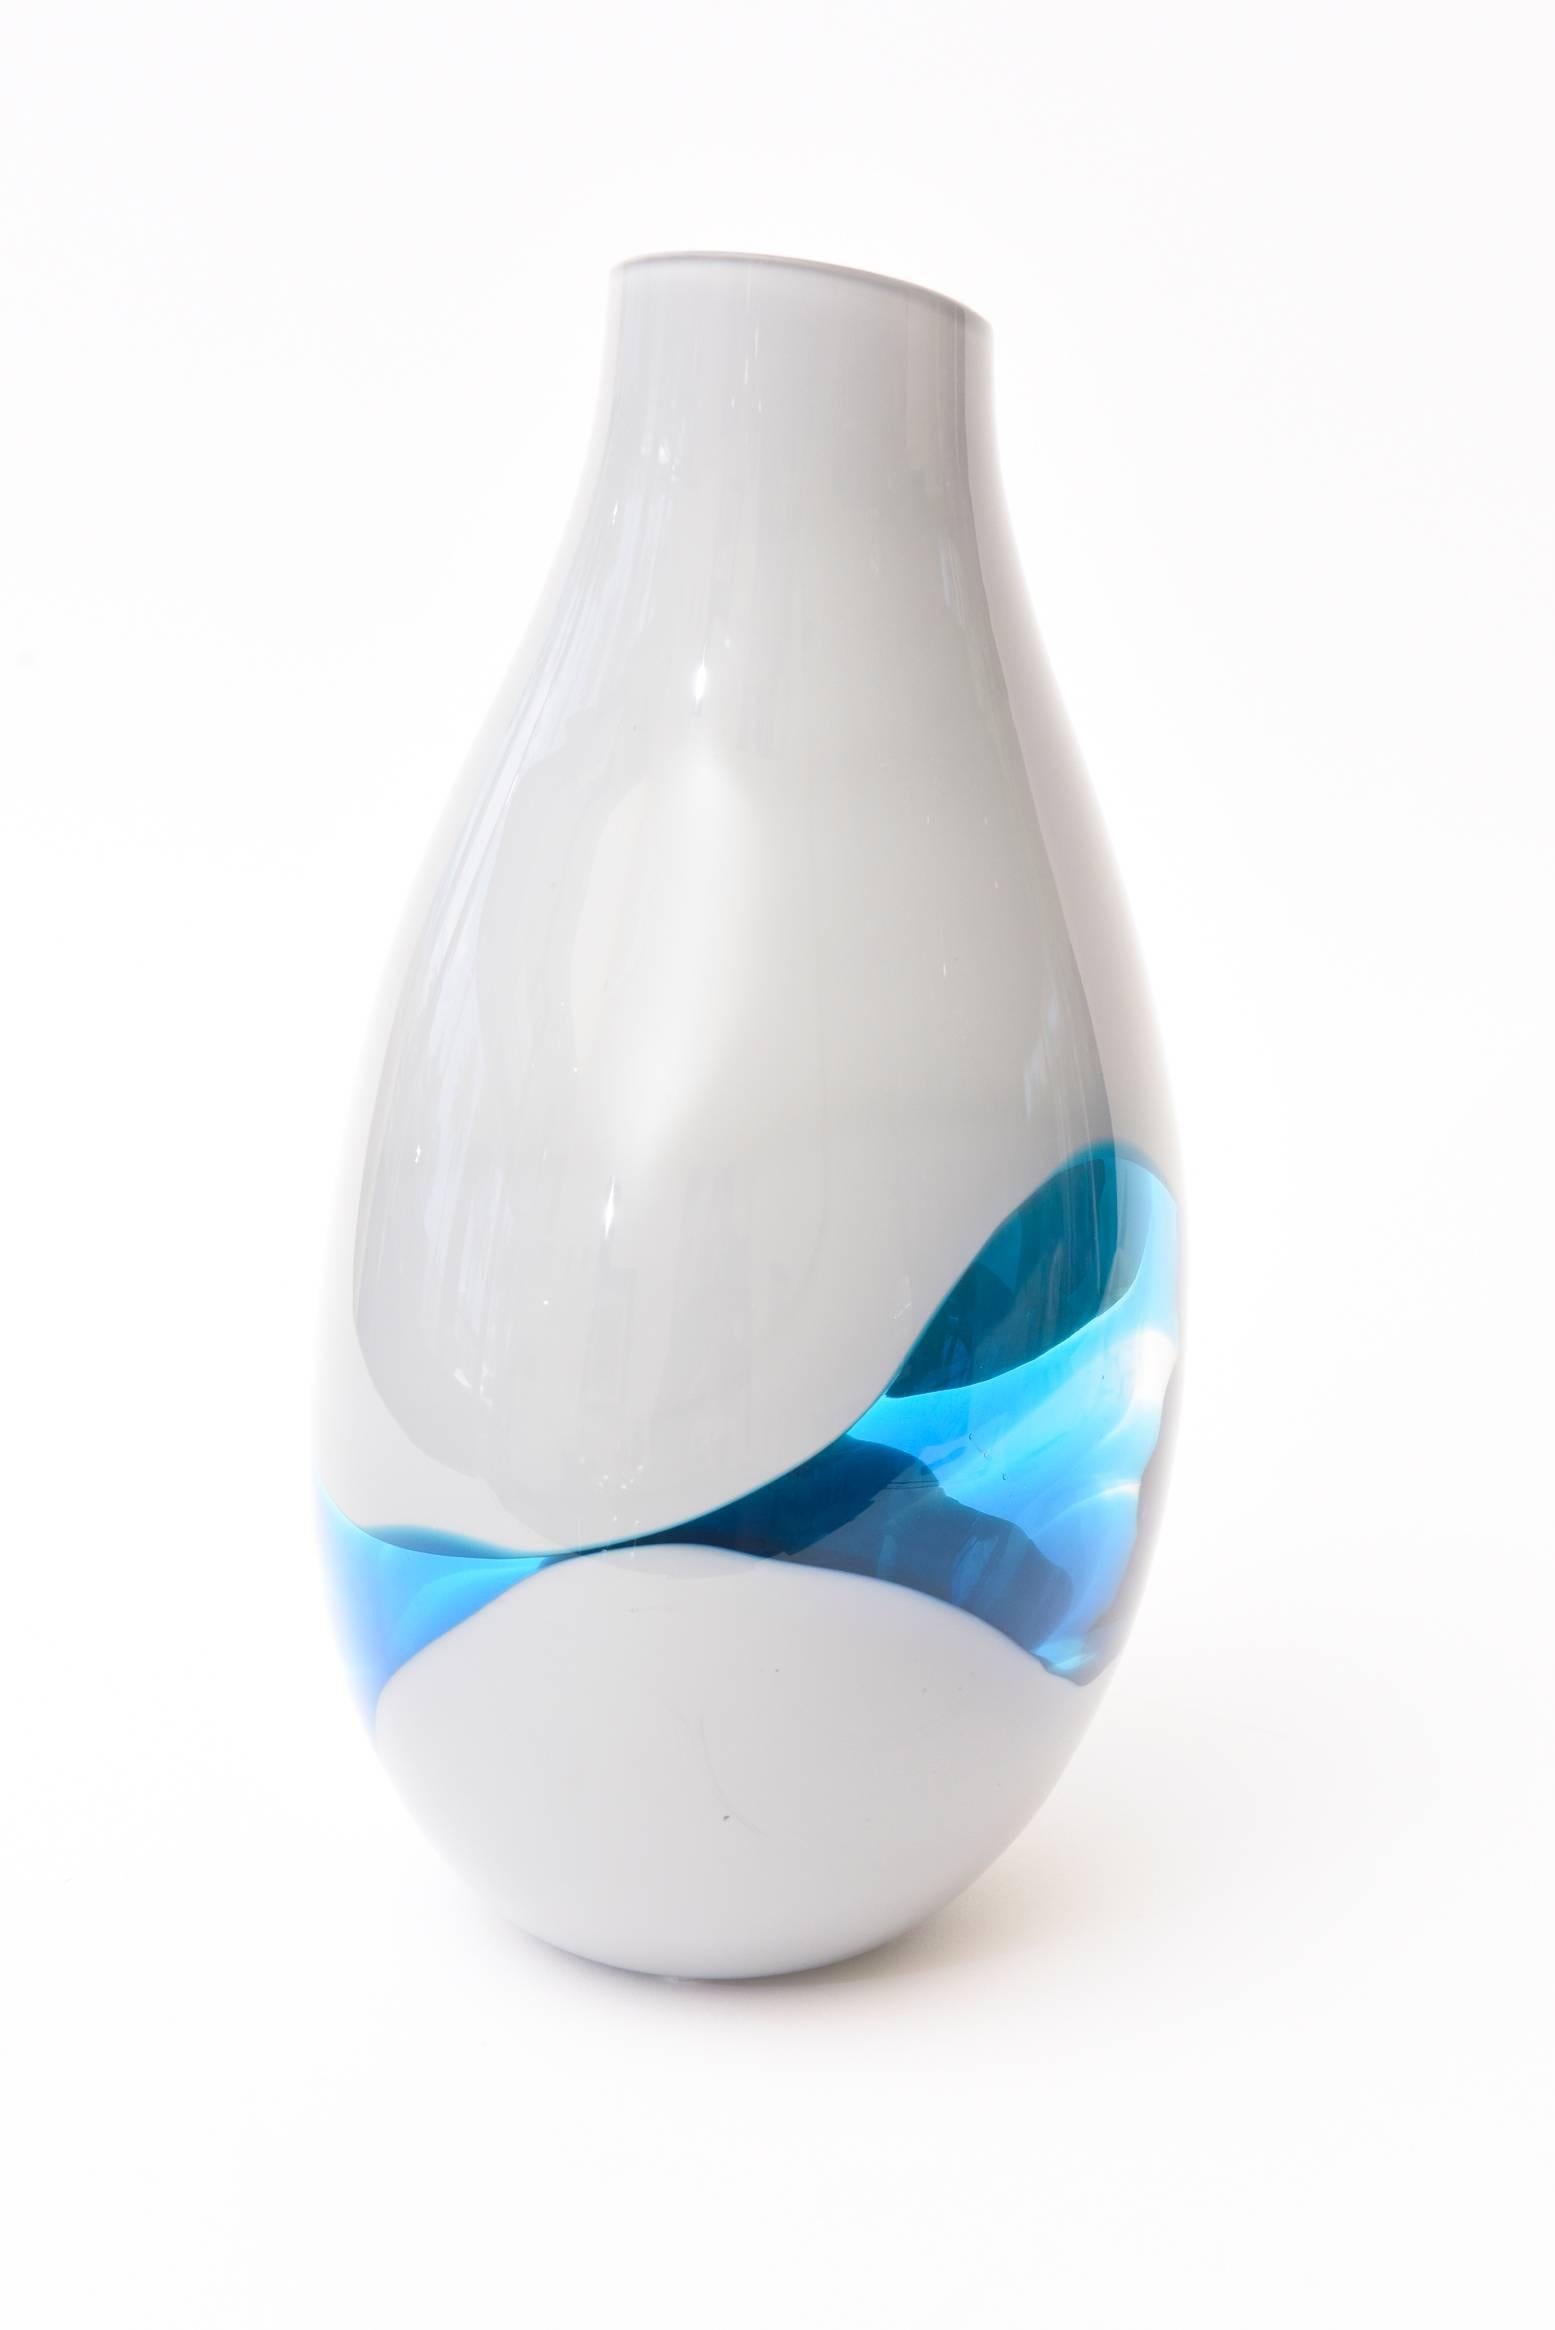 Late 20th Century Italian Murano Seguso Gray and Sapphire Blue Glass Sommerso Vase or Sculpture